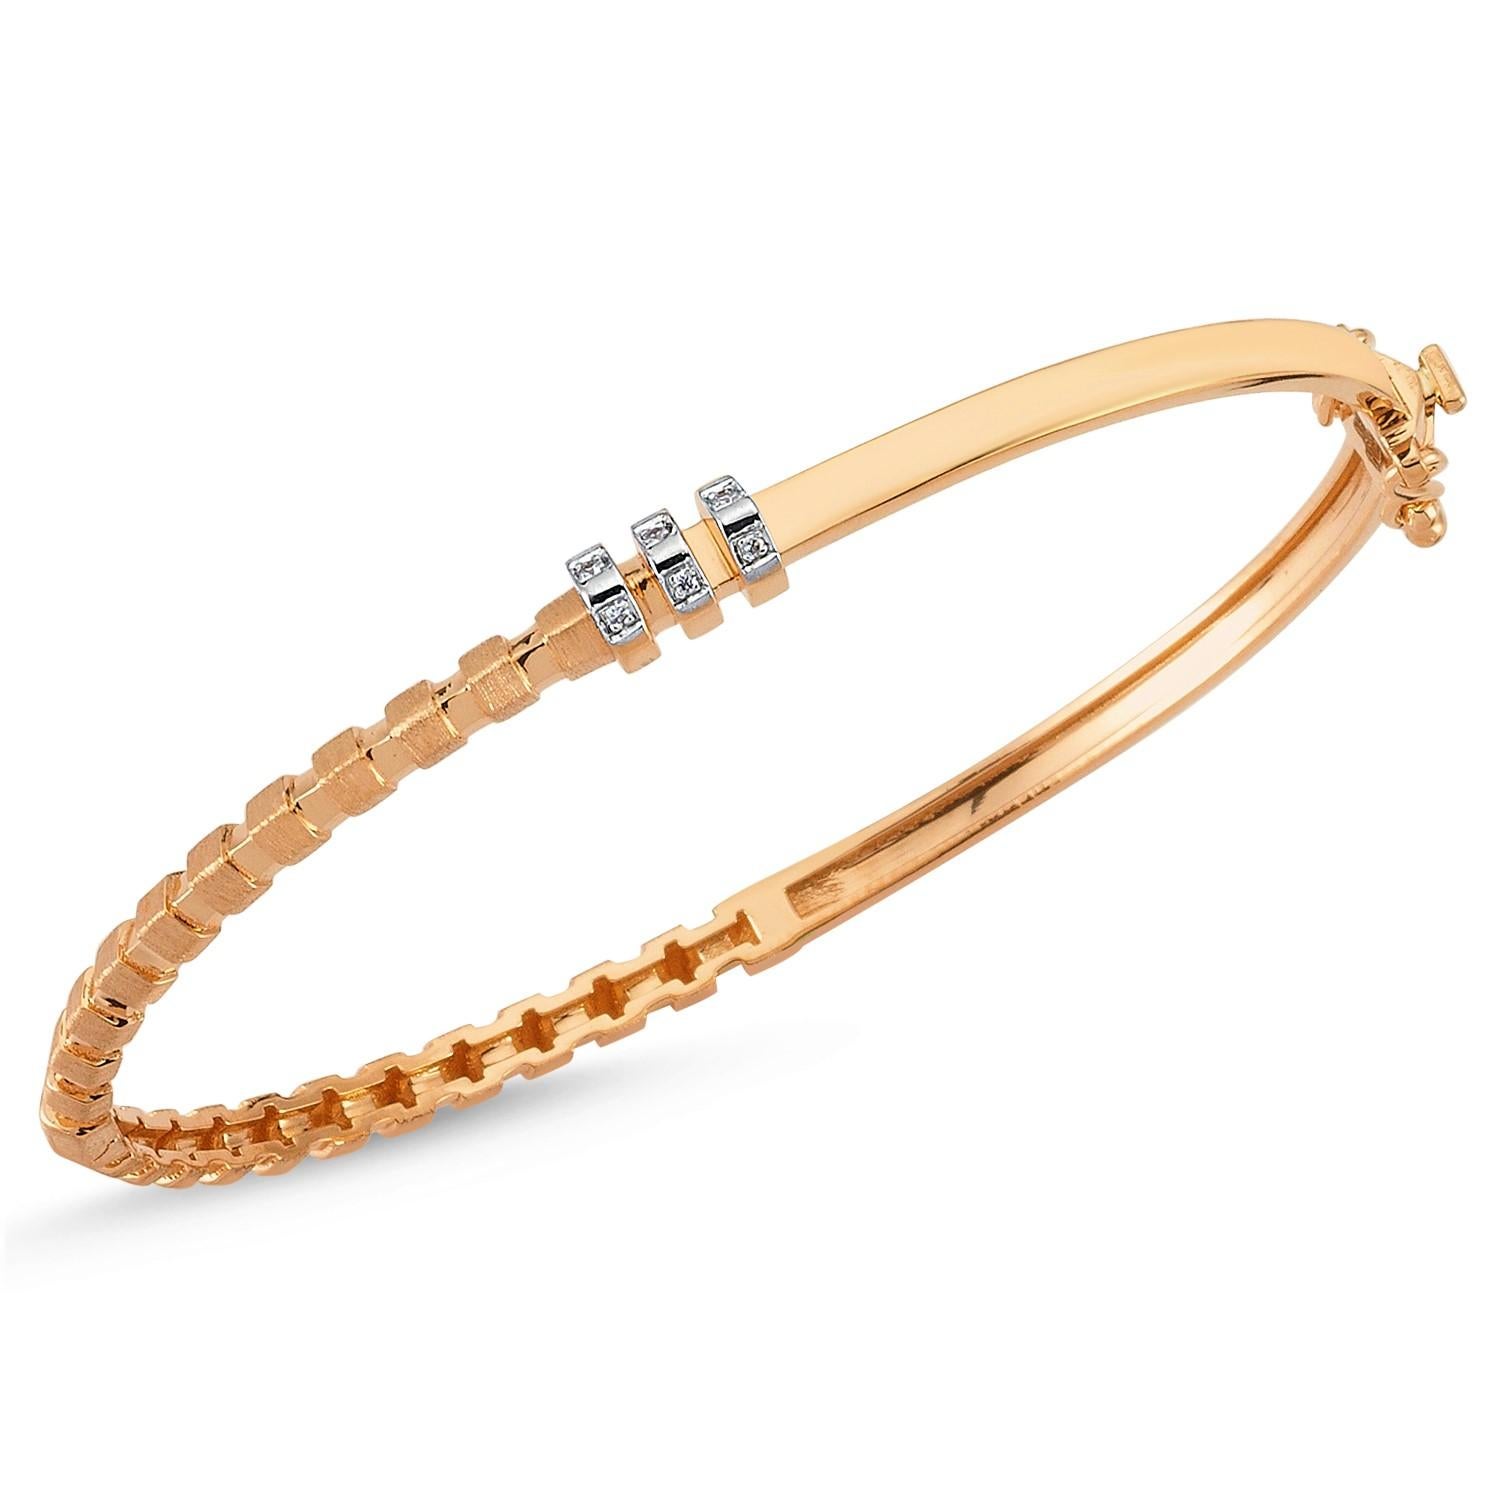 Taotie wide bangle in 14k rose gold by Selda Jewellery

Additional Information:-
Collection: Dragon Lady collection
14K Rose gold
0.4ct White diamond